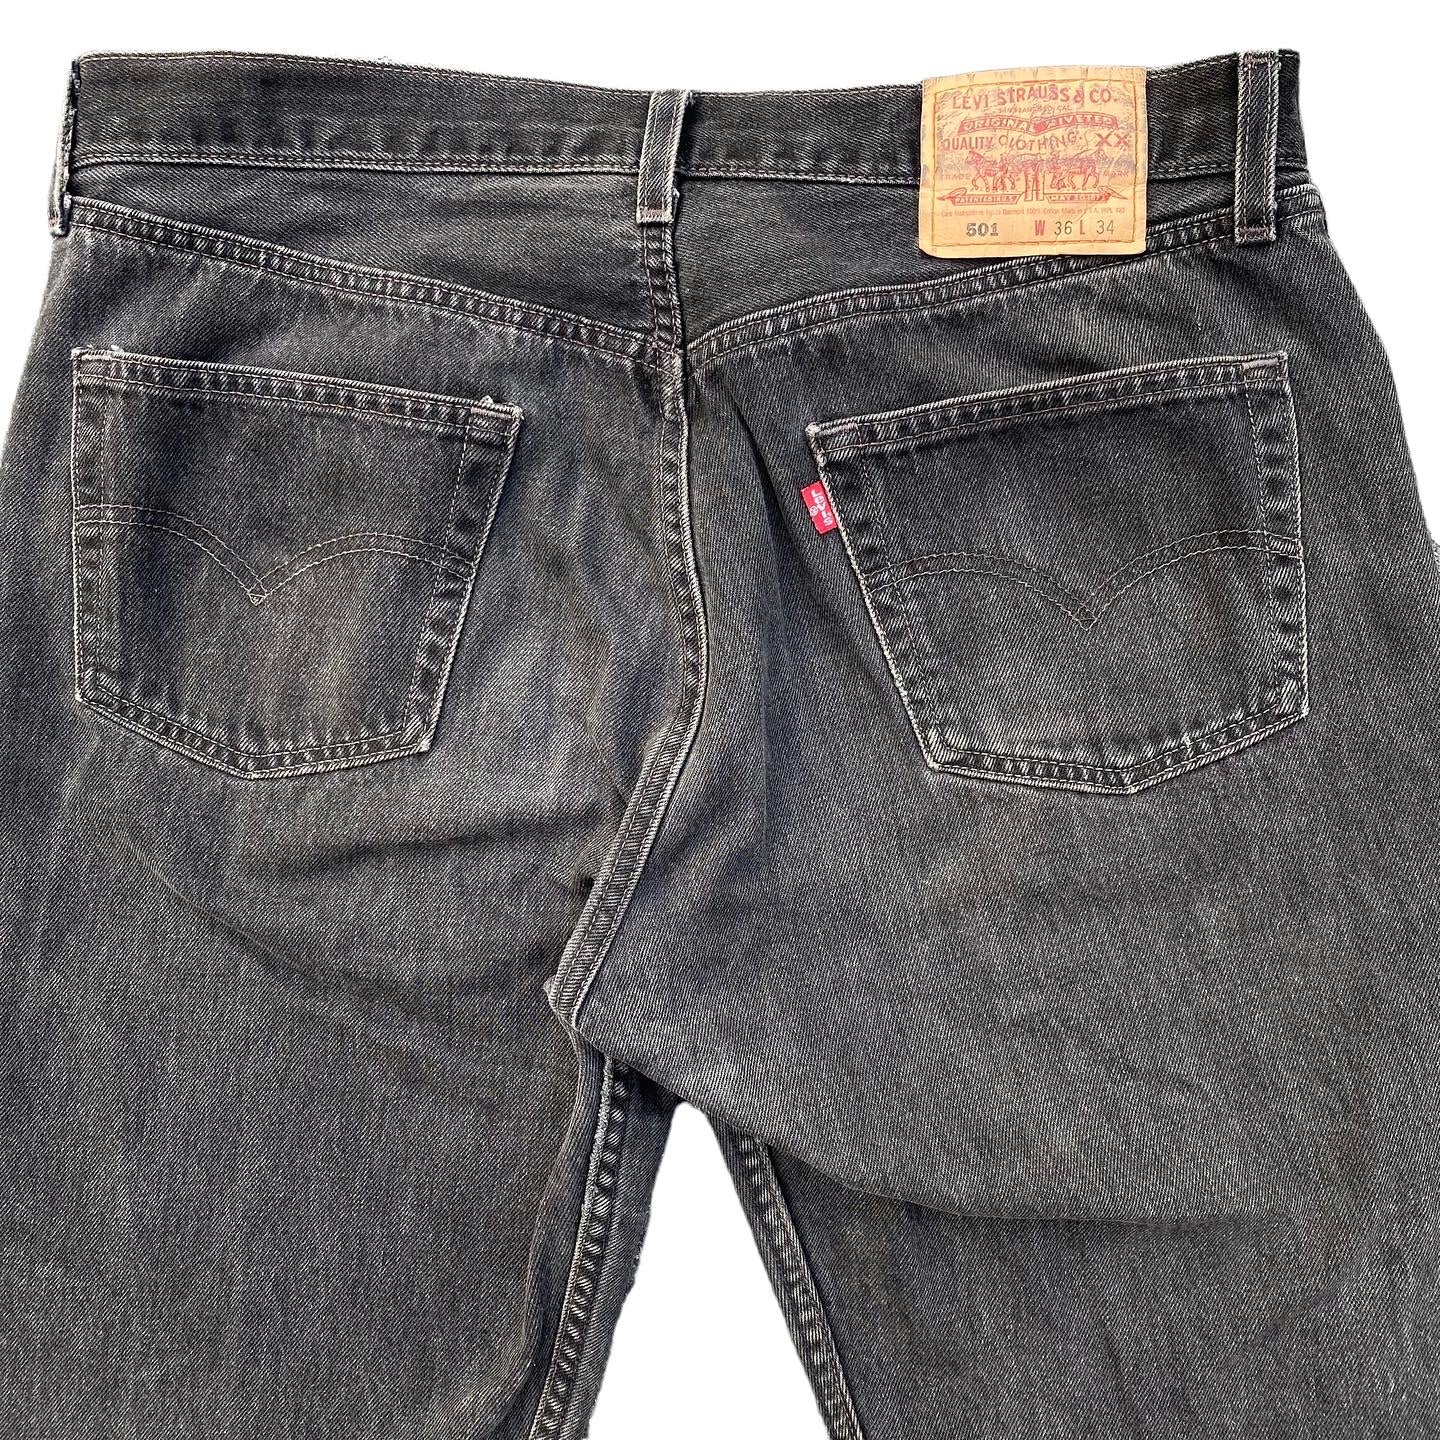 Levi’s 501 Made in usa🇺🇸 36/34